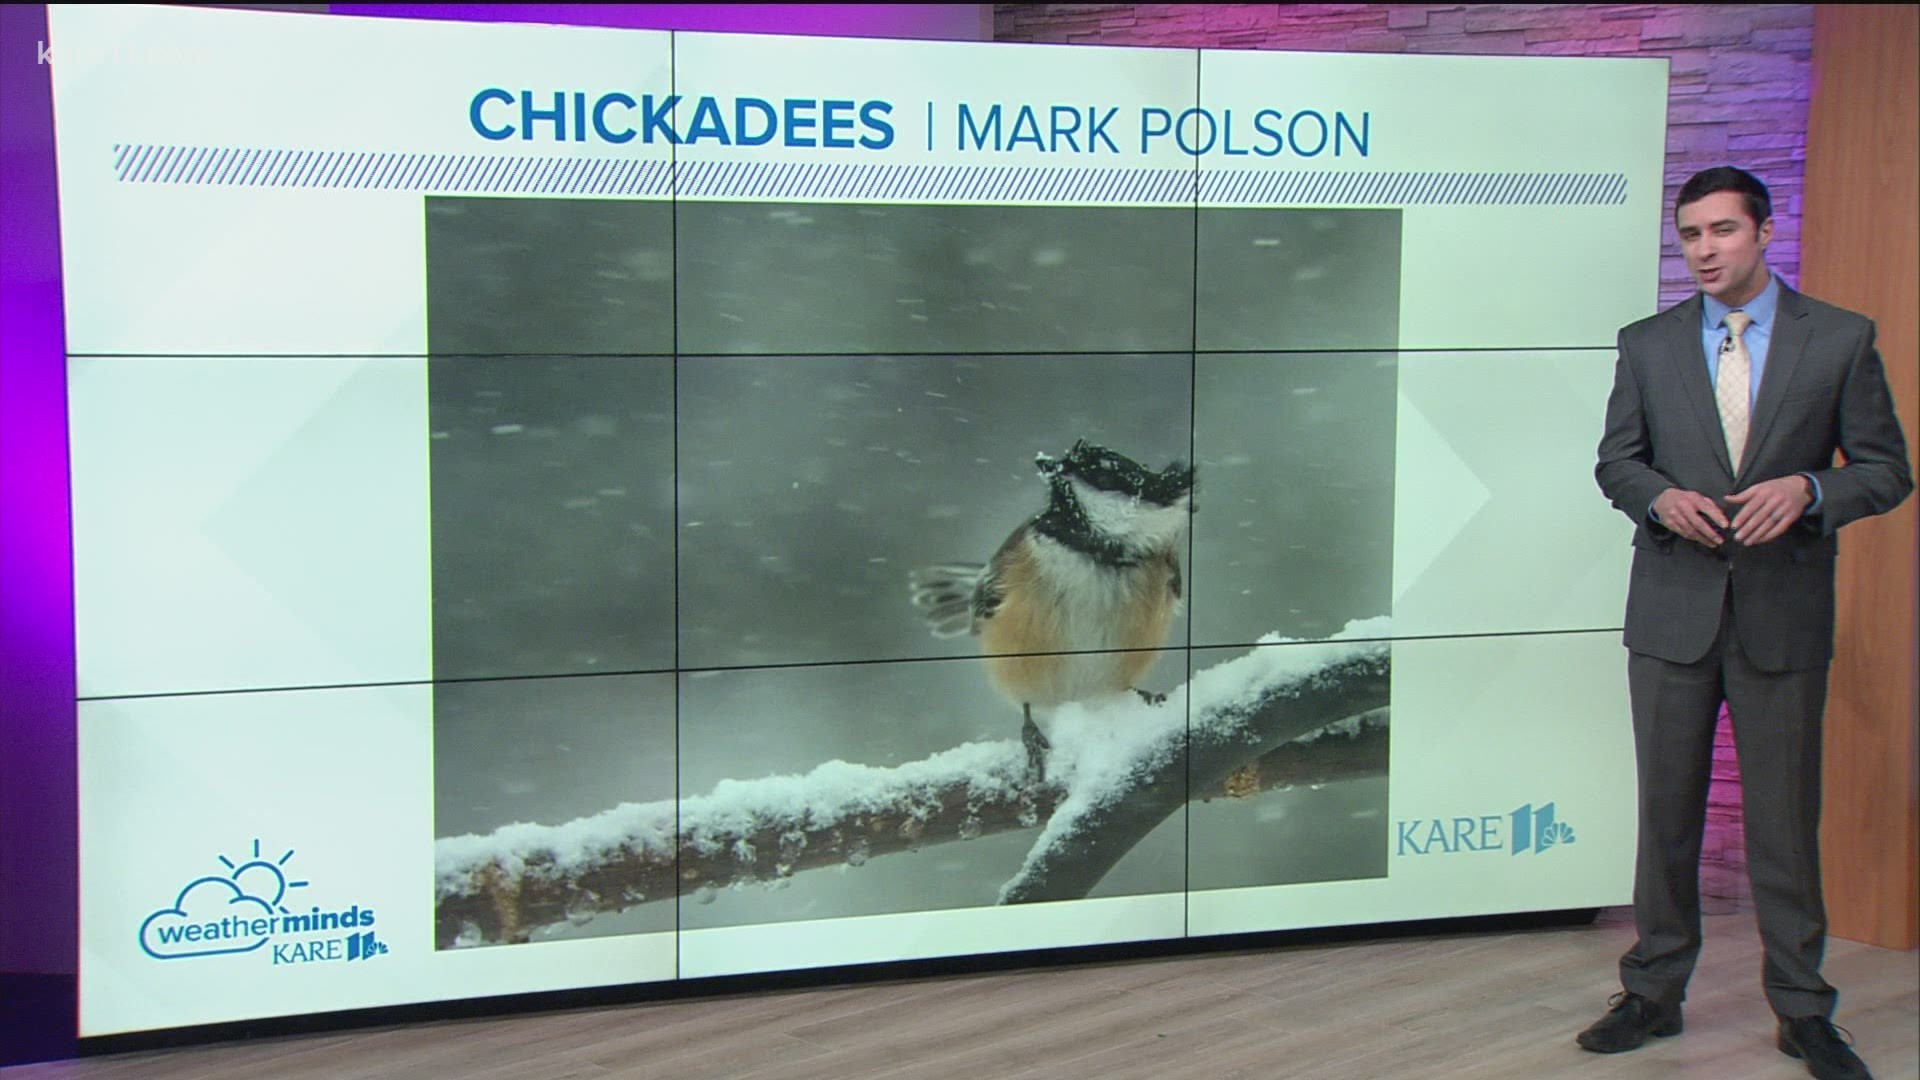 KARE 11 meteorologist Ben Dery explains how chickadees can not only survive, but thrive in the winter months.